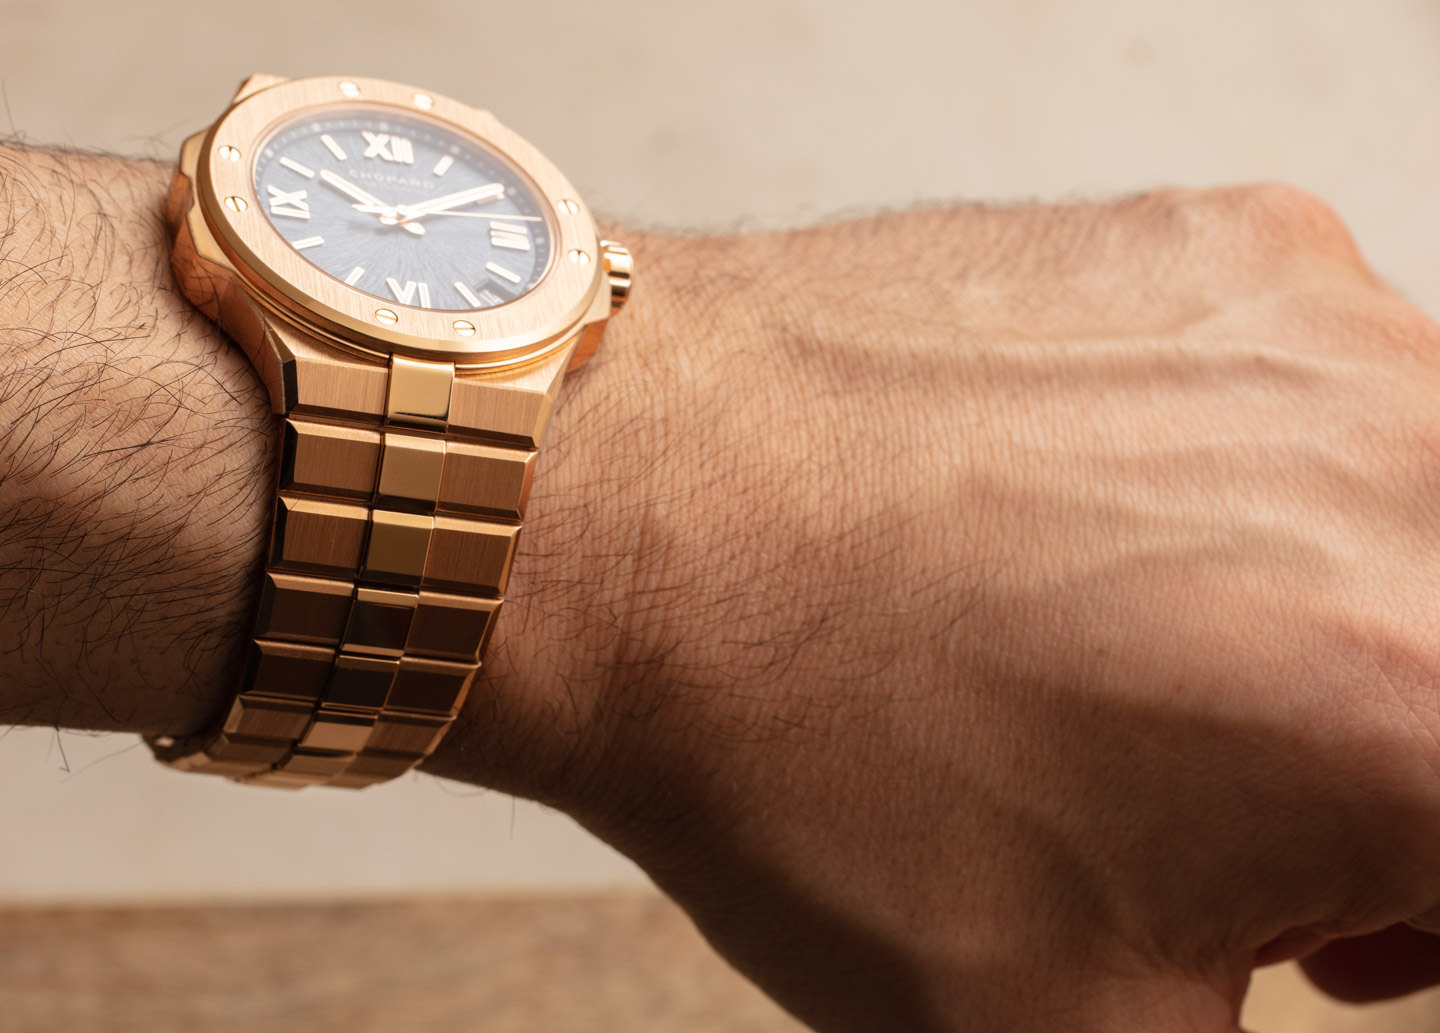 Chopard Alpine Eagle 41mm 18k Rose Gold Watch Review